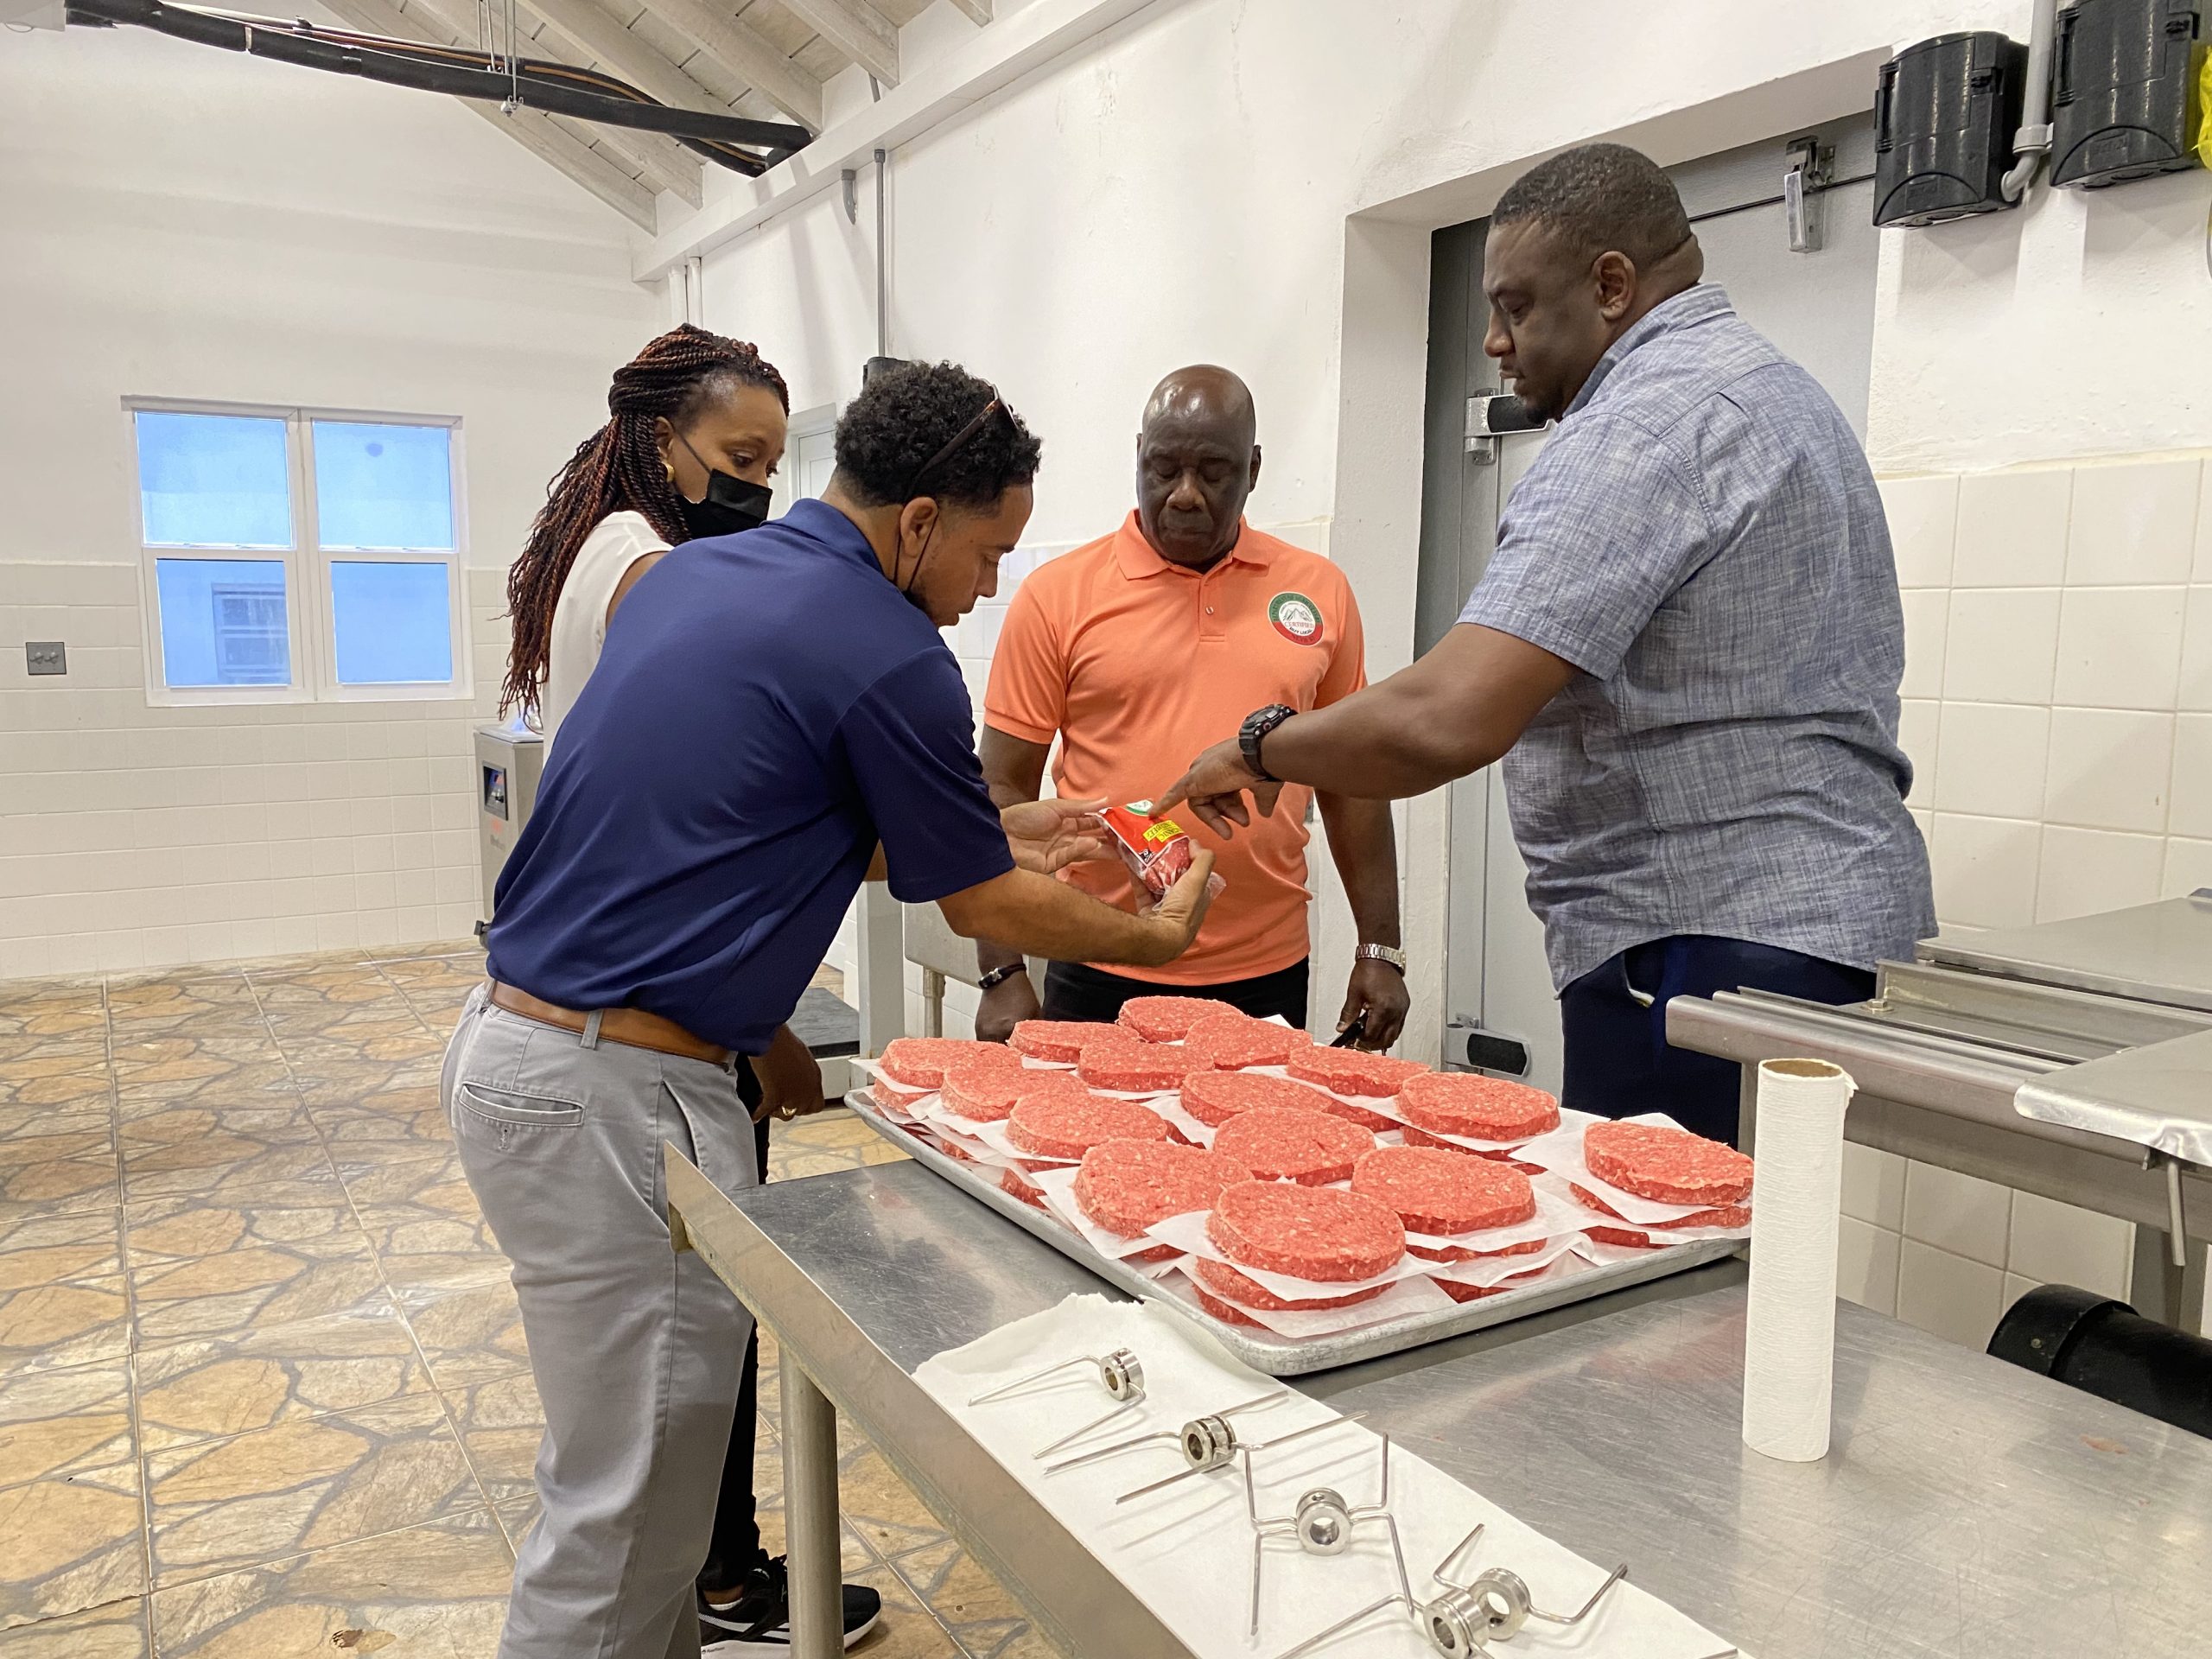 (L-r) Visiting officials to Nevis from Anguilla Hon. Kyle Hodge, Minister of Economic Development, Natural Resources and Information Technology; and Ms. Melissa Meade, Chief Natural Resources Officer in the Department of Natural Resources; looking at local beef products at the Abattoir Division with Hon. Alexis Jeffers, Deputy Premier of Nevis and Minister of Agriculture; and Mr. Garfield Griffin, Manager of the Nevis Abattoir and Meat Processing Plant at the Department of Agriculture on April 27, 2022